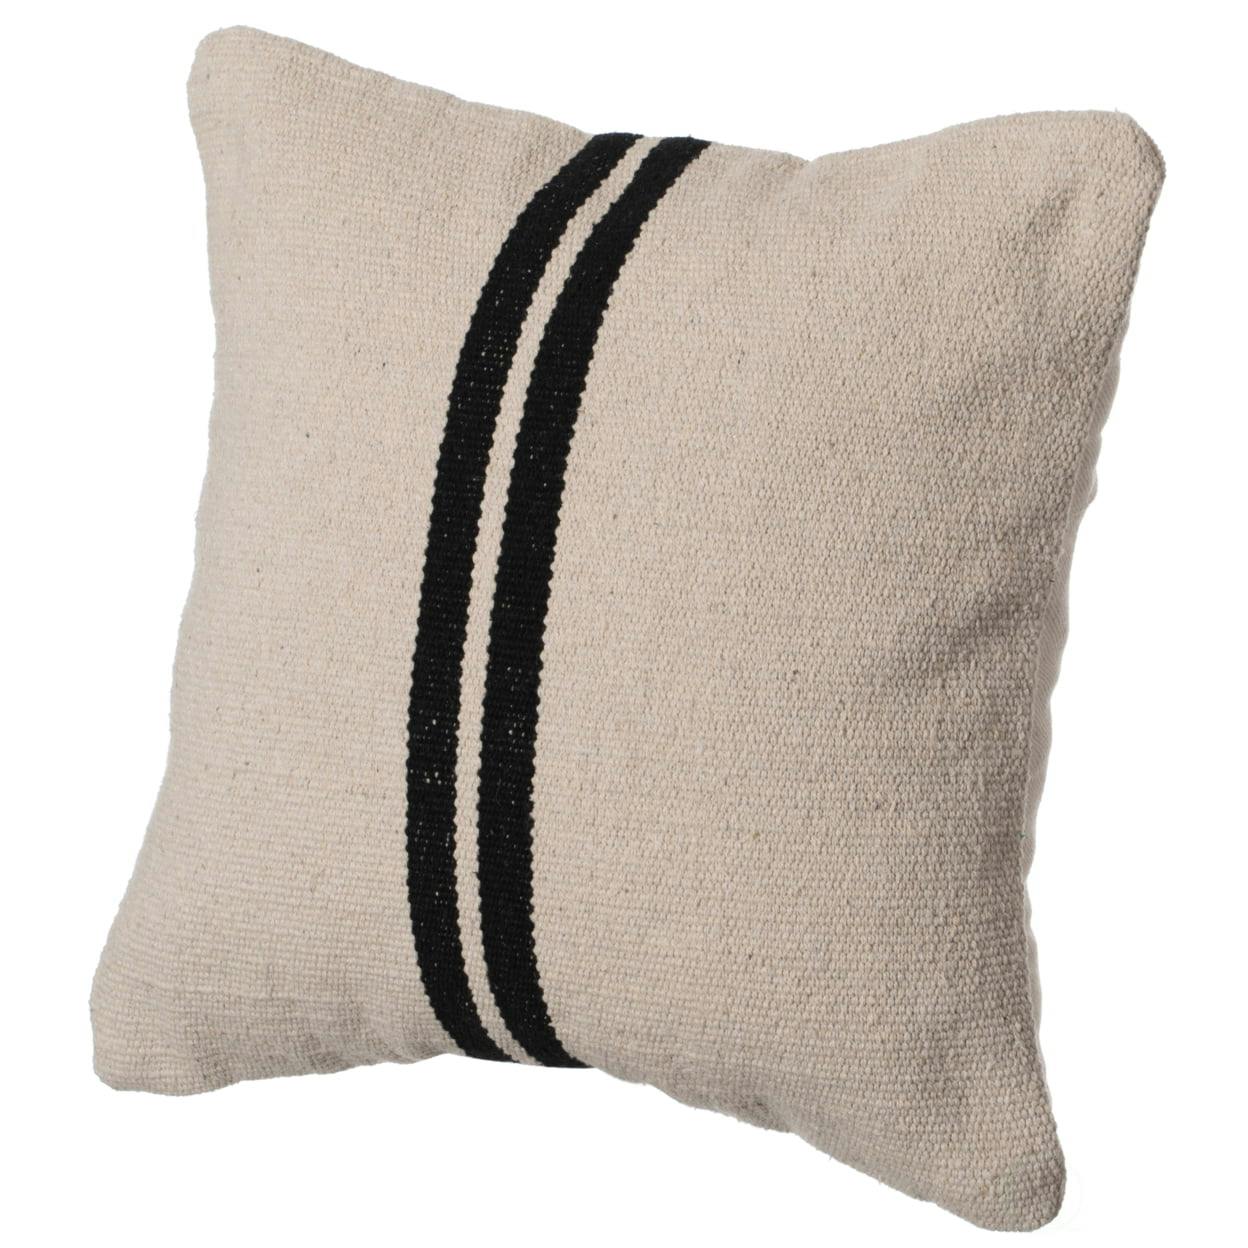 Handwoven Boho-Chic Cotton 17" Throw Pillow Cover with Drawstring